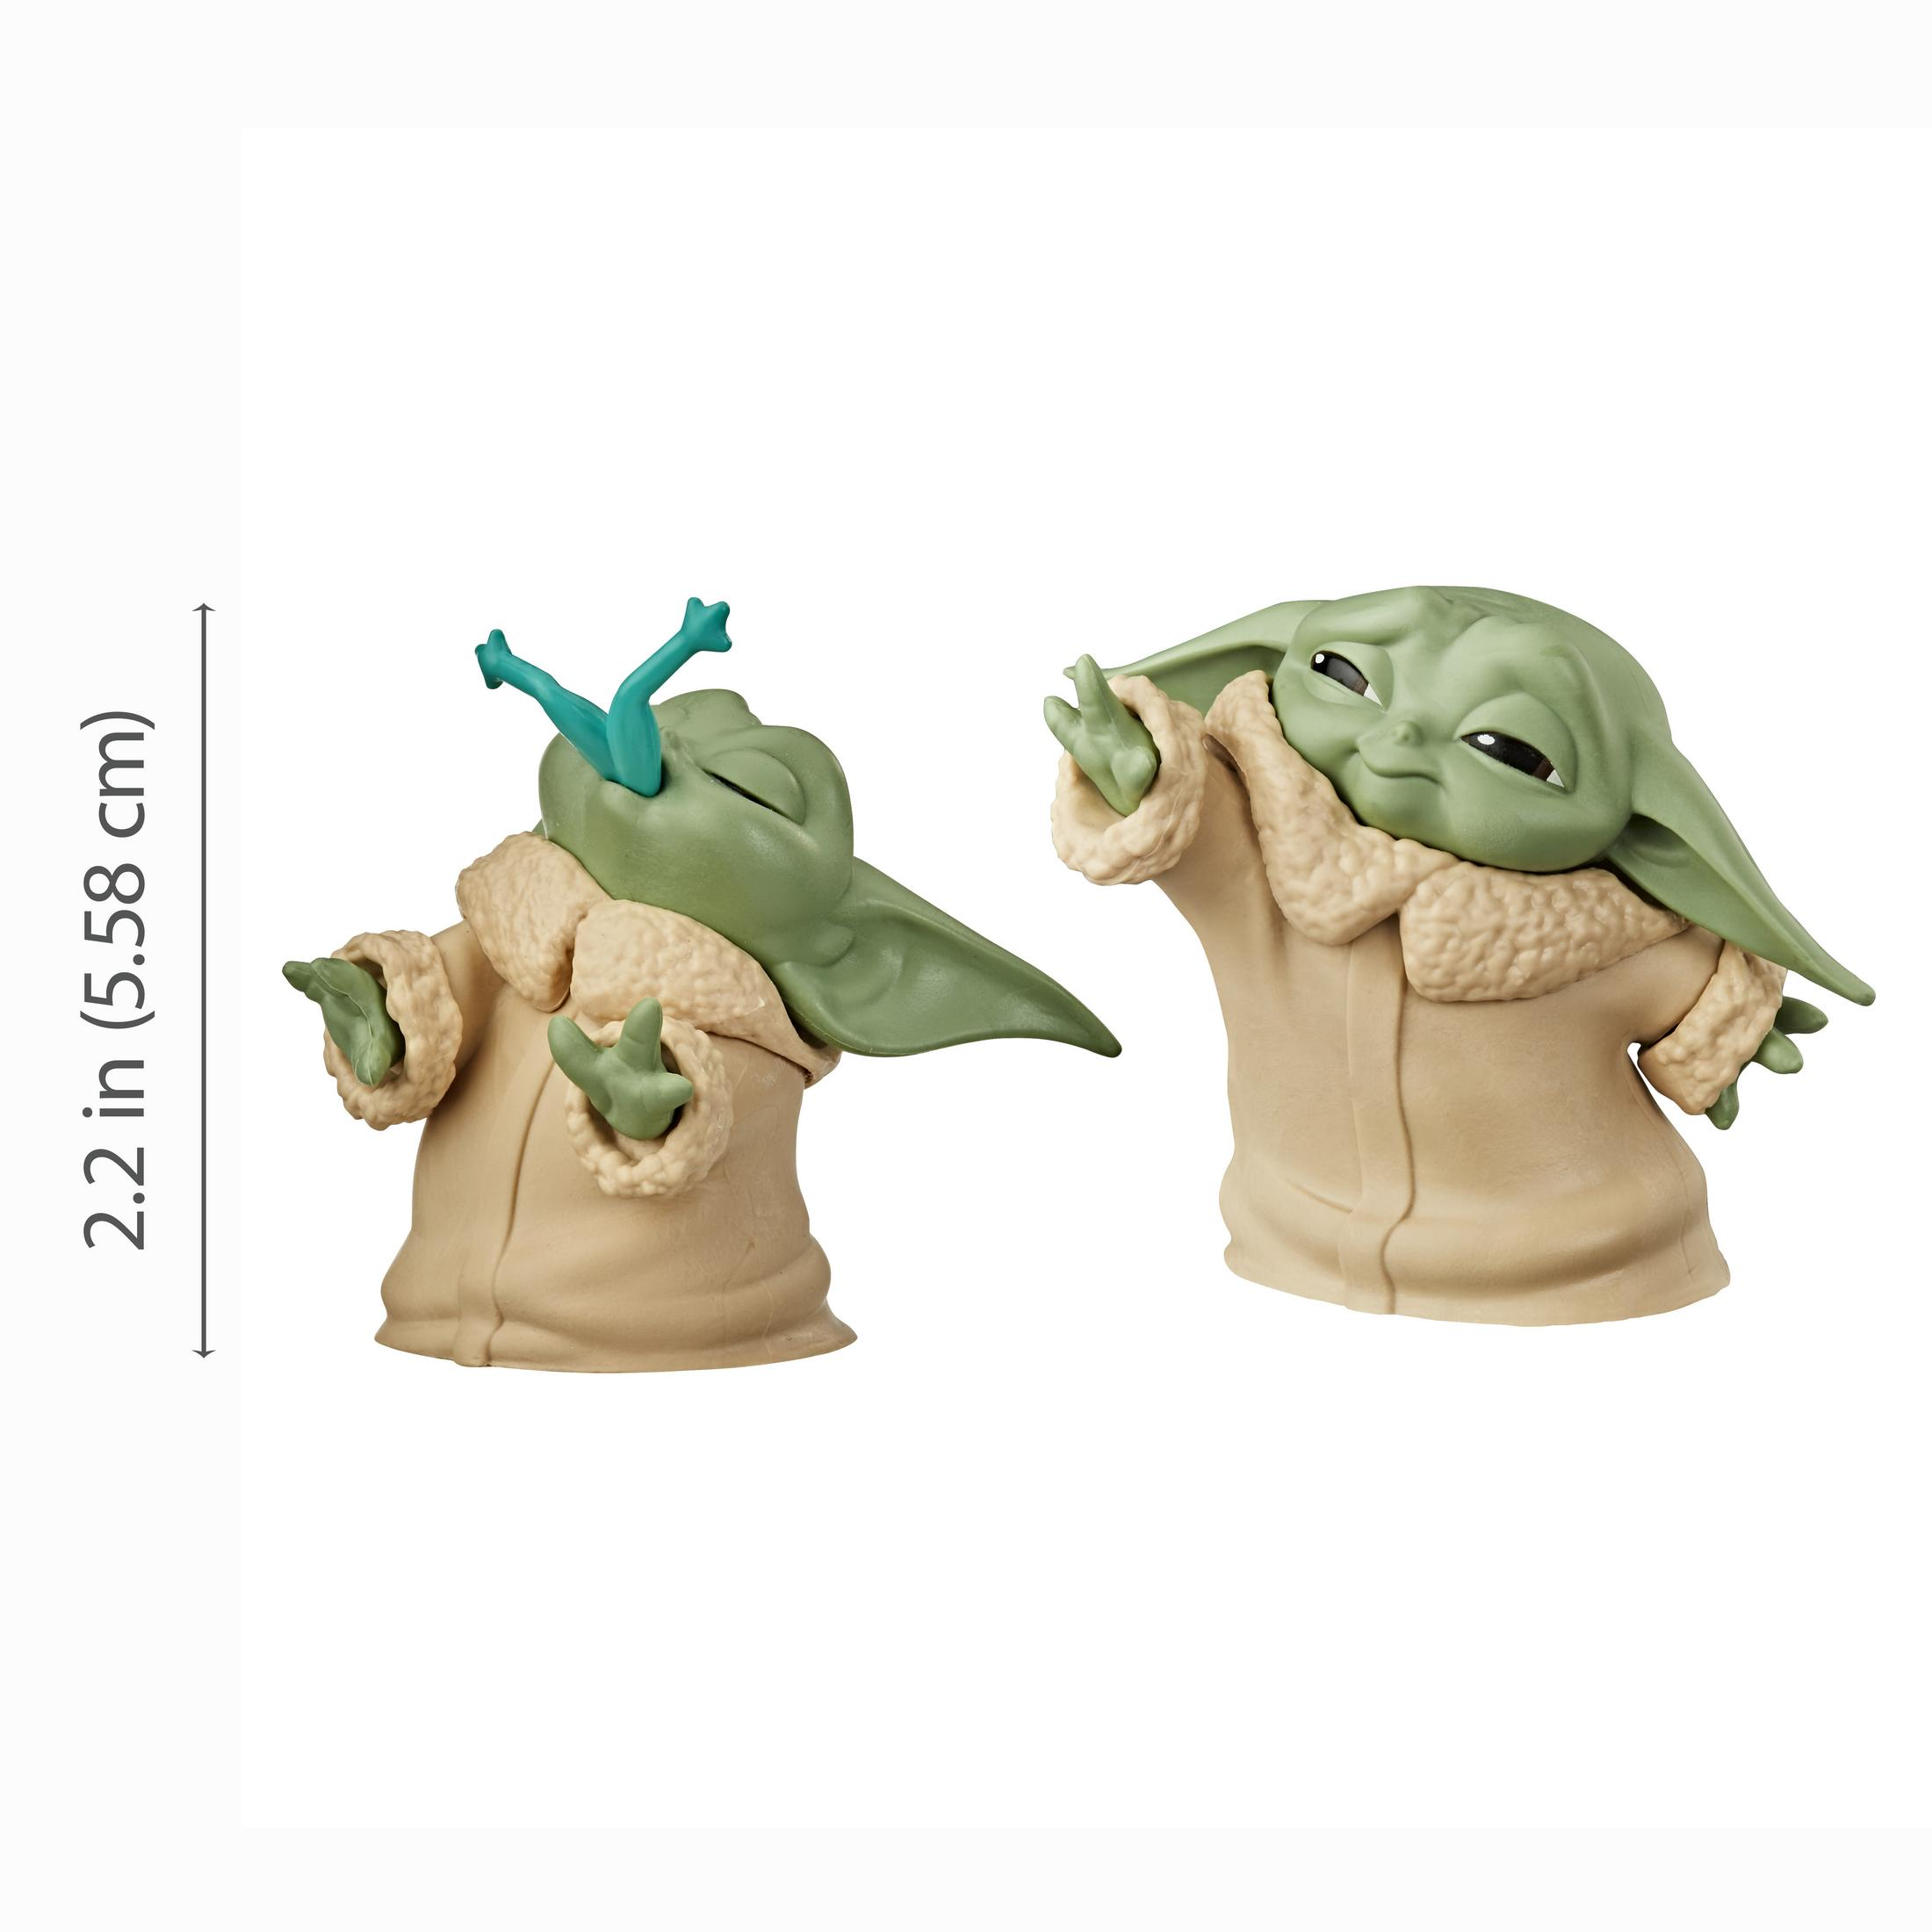 HASBRO Star Wars The Actionfigur Yoda, Baby Mandalorian Child (Froggy The Snack Froschiger Snack) Figur